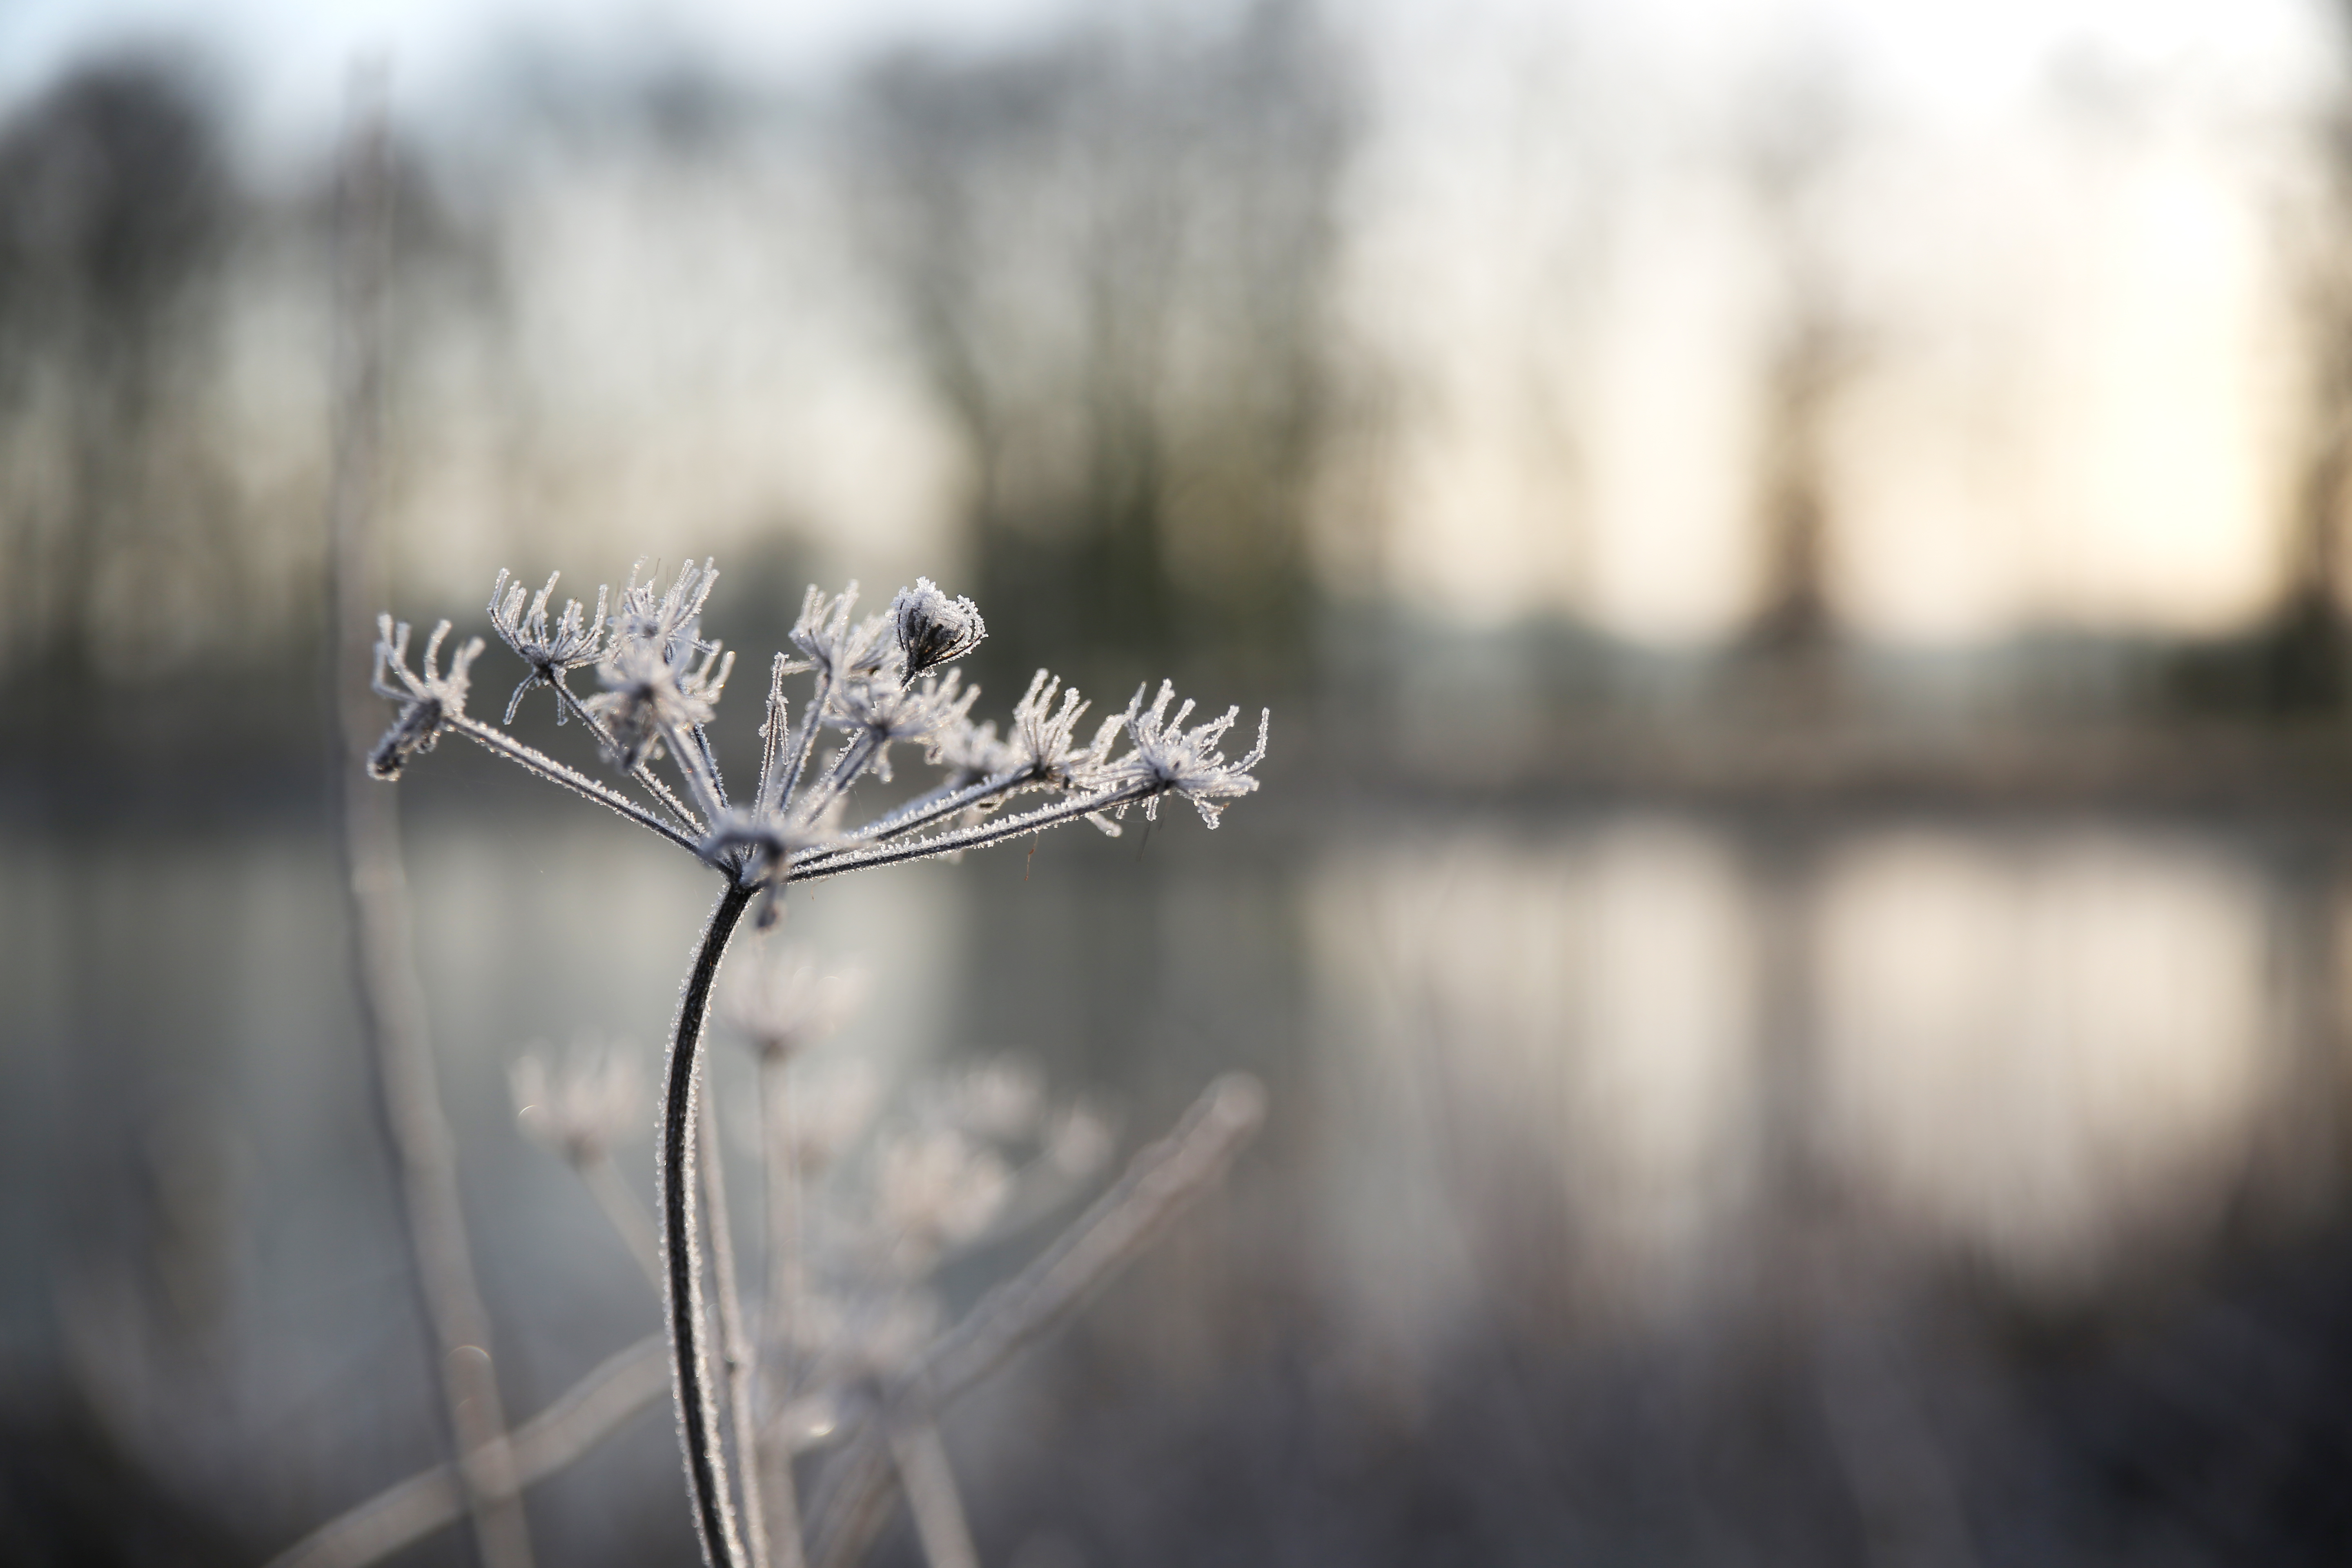 General 5760x3840 nature morning cold plants frost winter